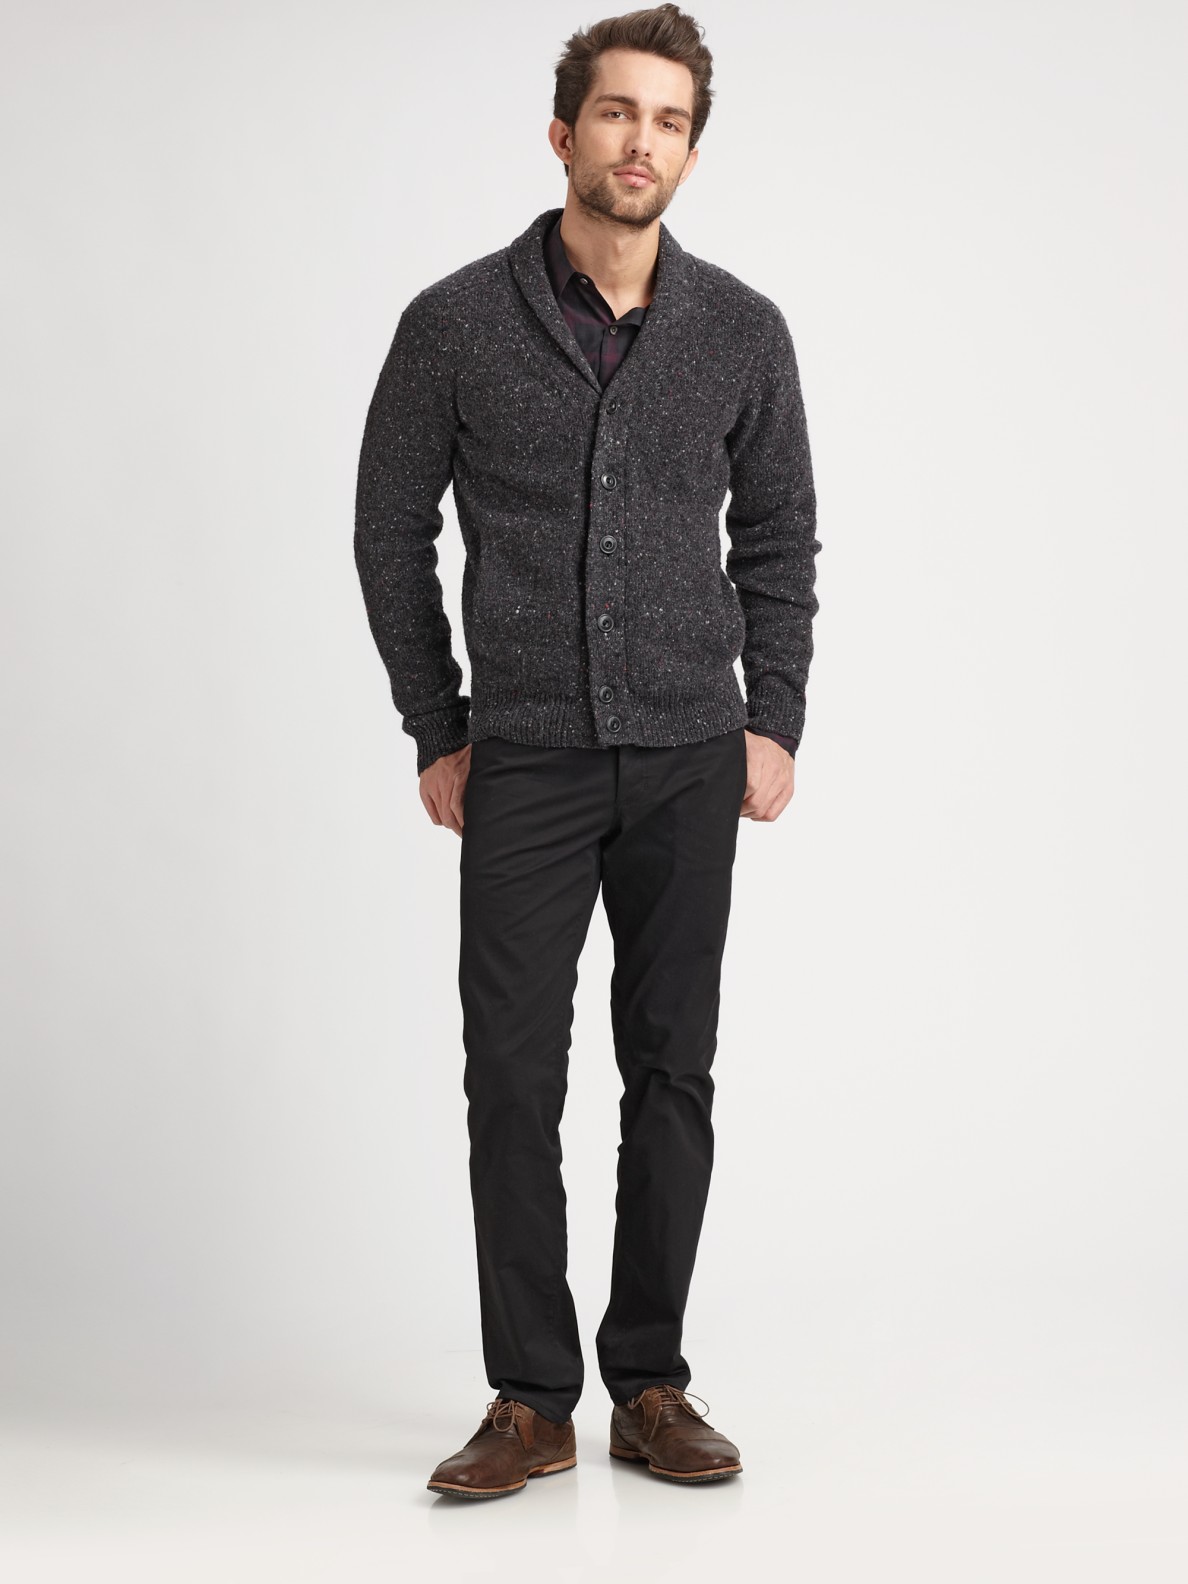 Theory Tweed Cardigan in Charcoal (Gray) for Men - Lyst